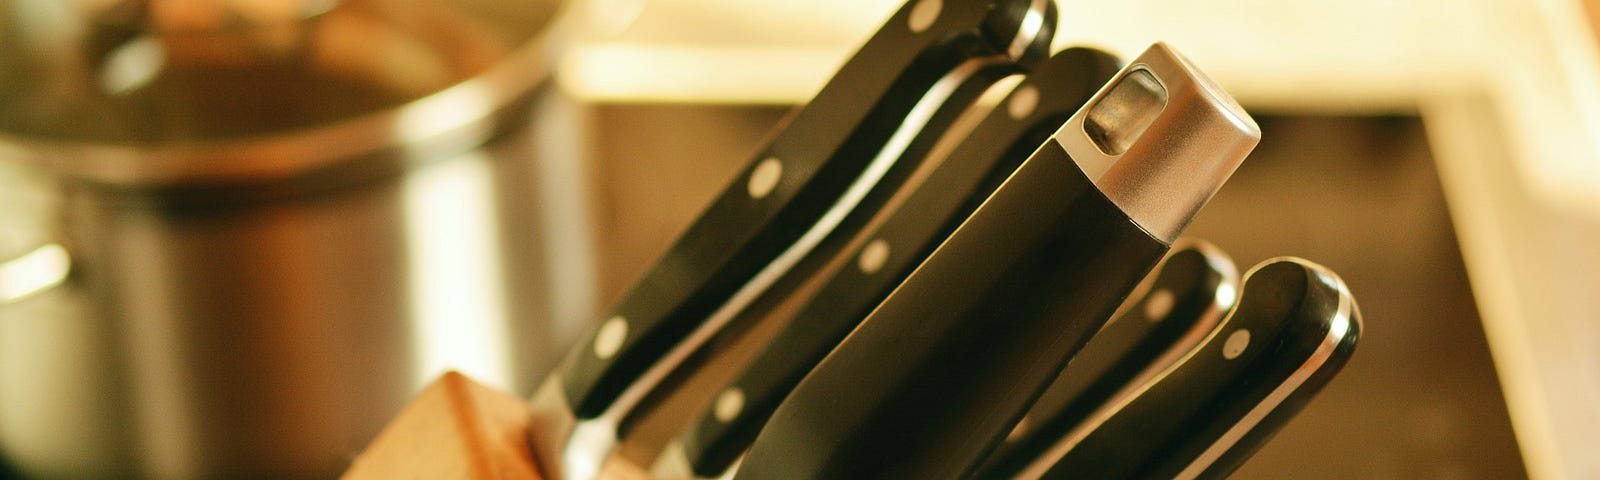 A block of kitchen knives